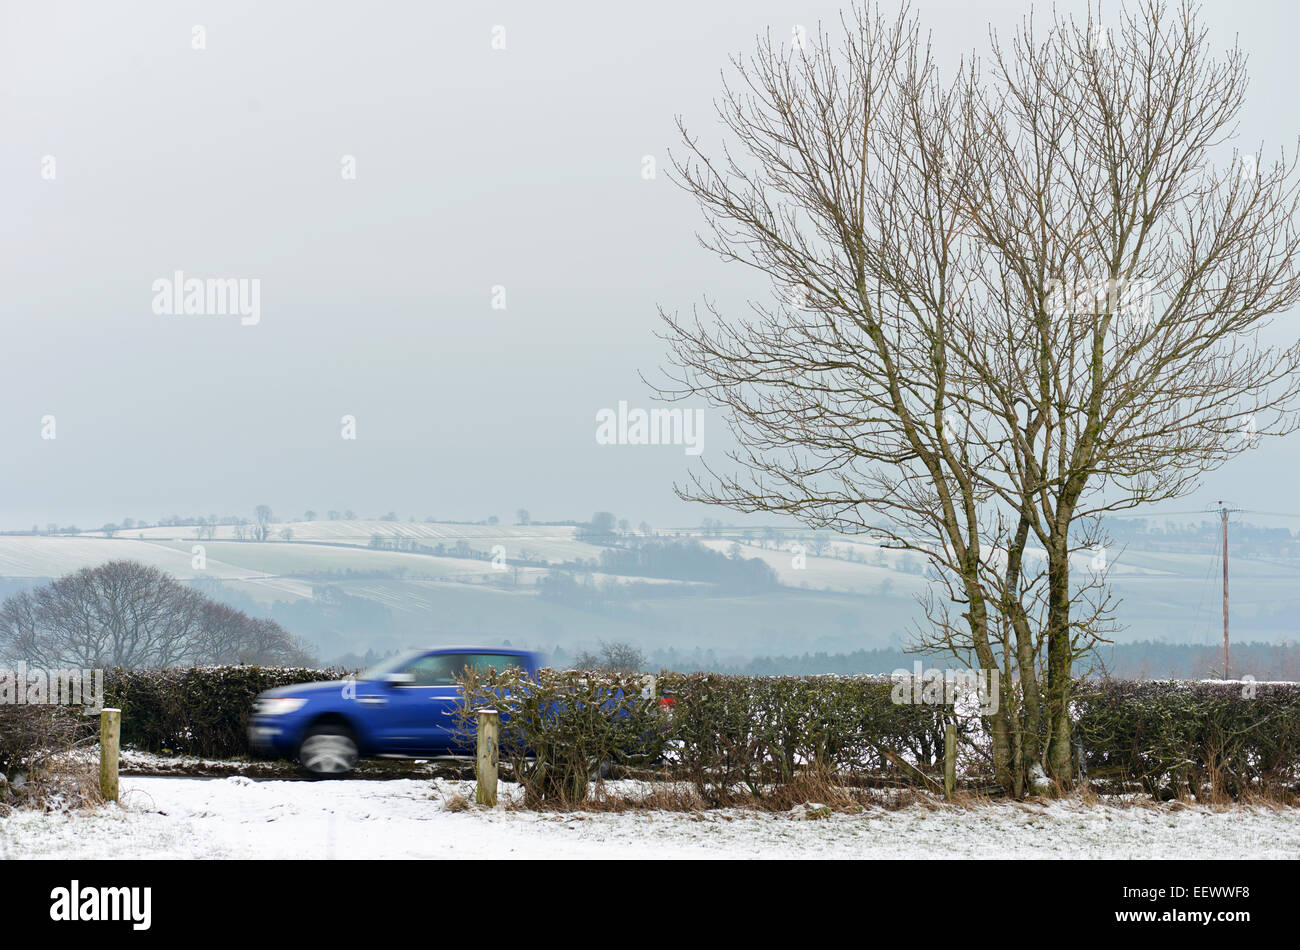 Whashton Green, North Yorkshire, UK. 22nd January, 2015. UK Weather: A van is driven along a quiet road in North Yorkshire where freezing fog and black ice make driving hazardous. © Robert Smith/Alamy Stock Photo